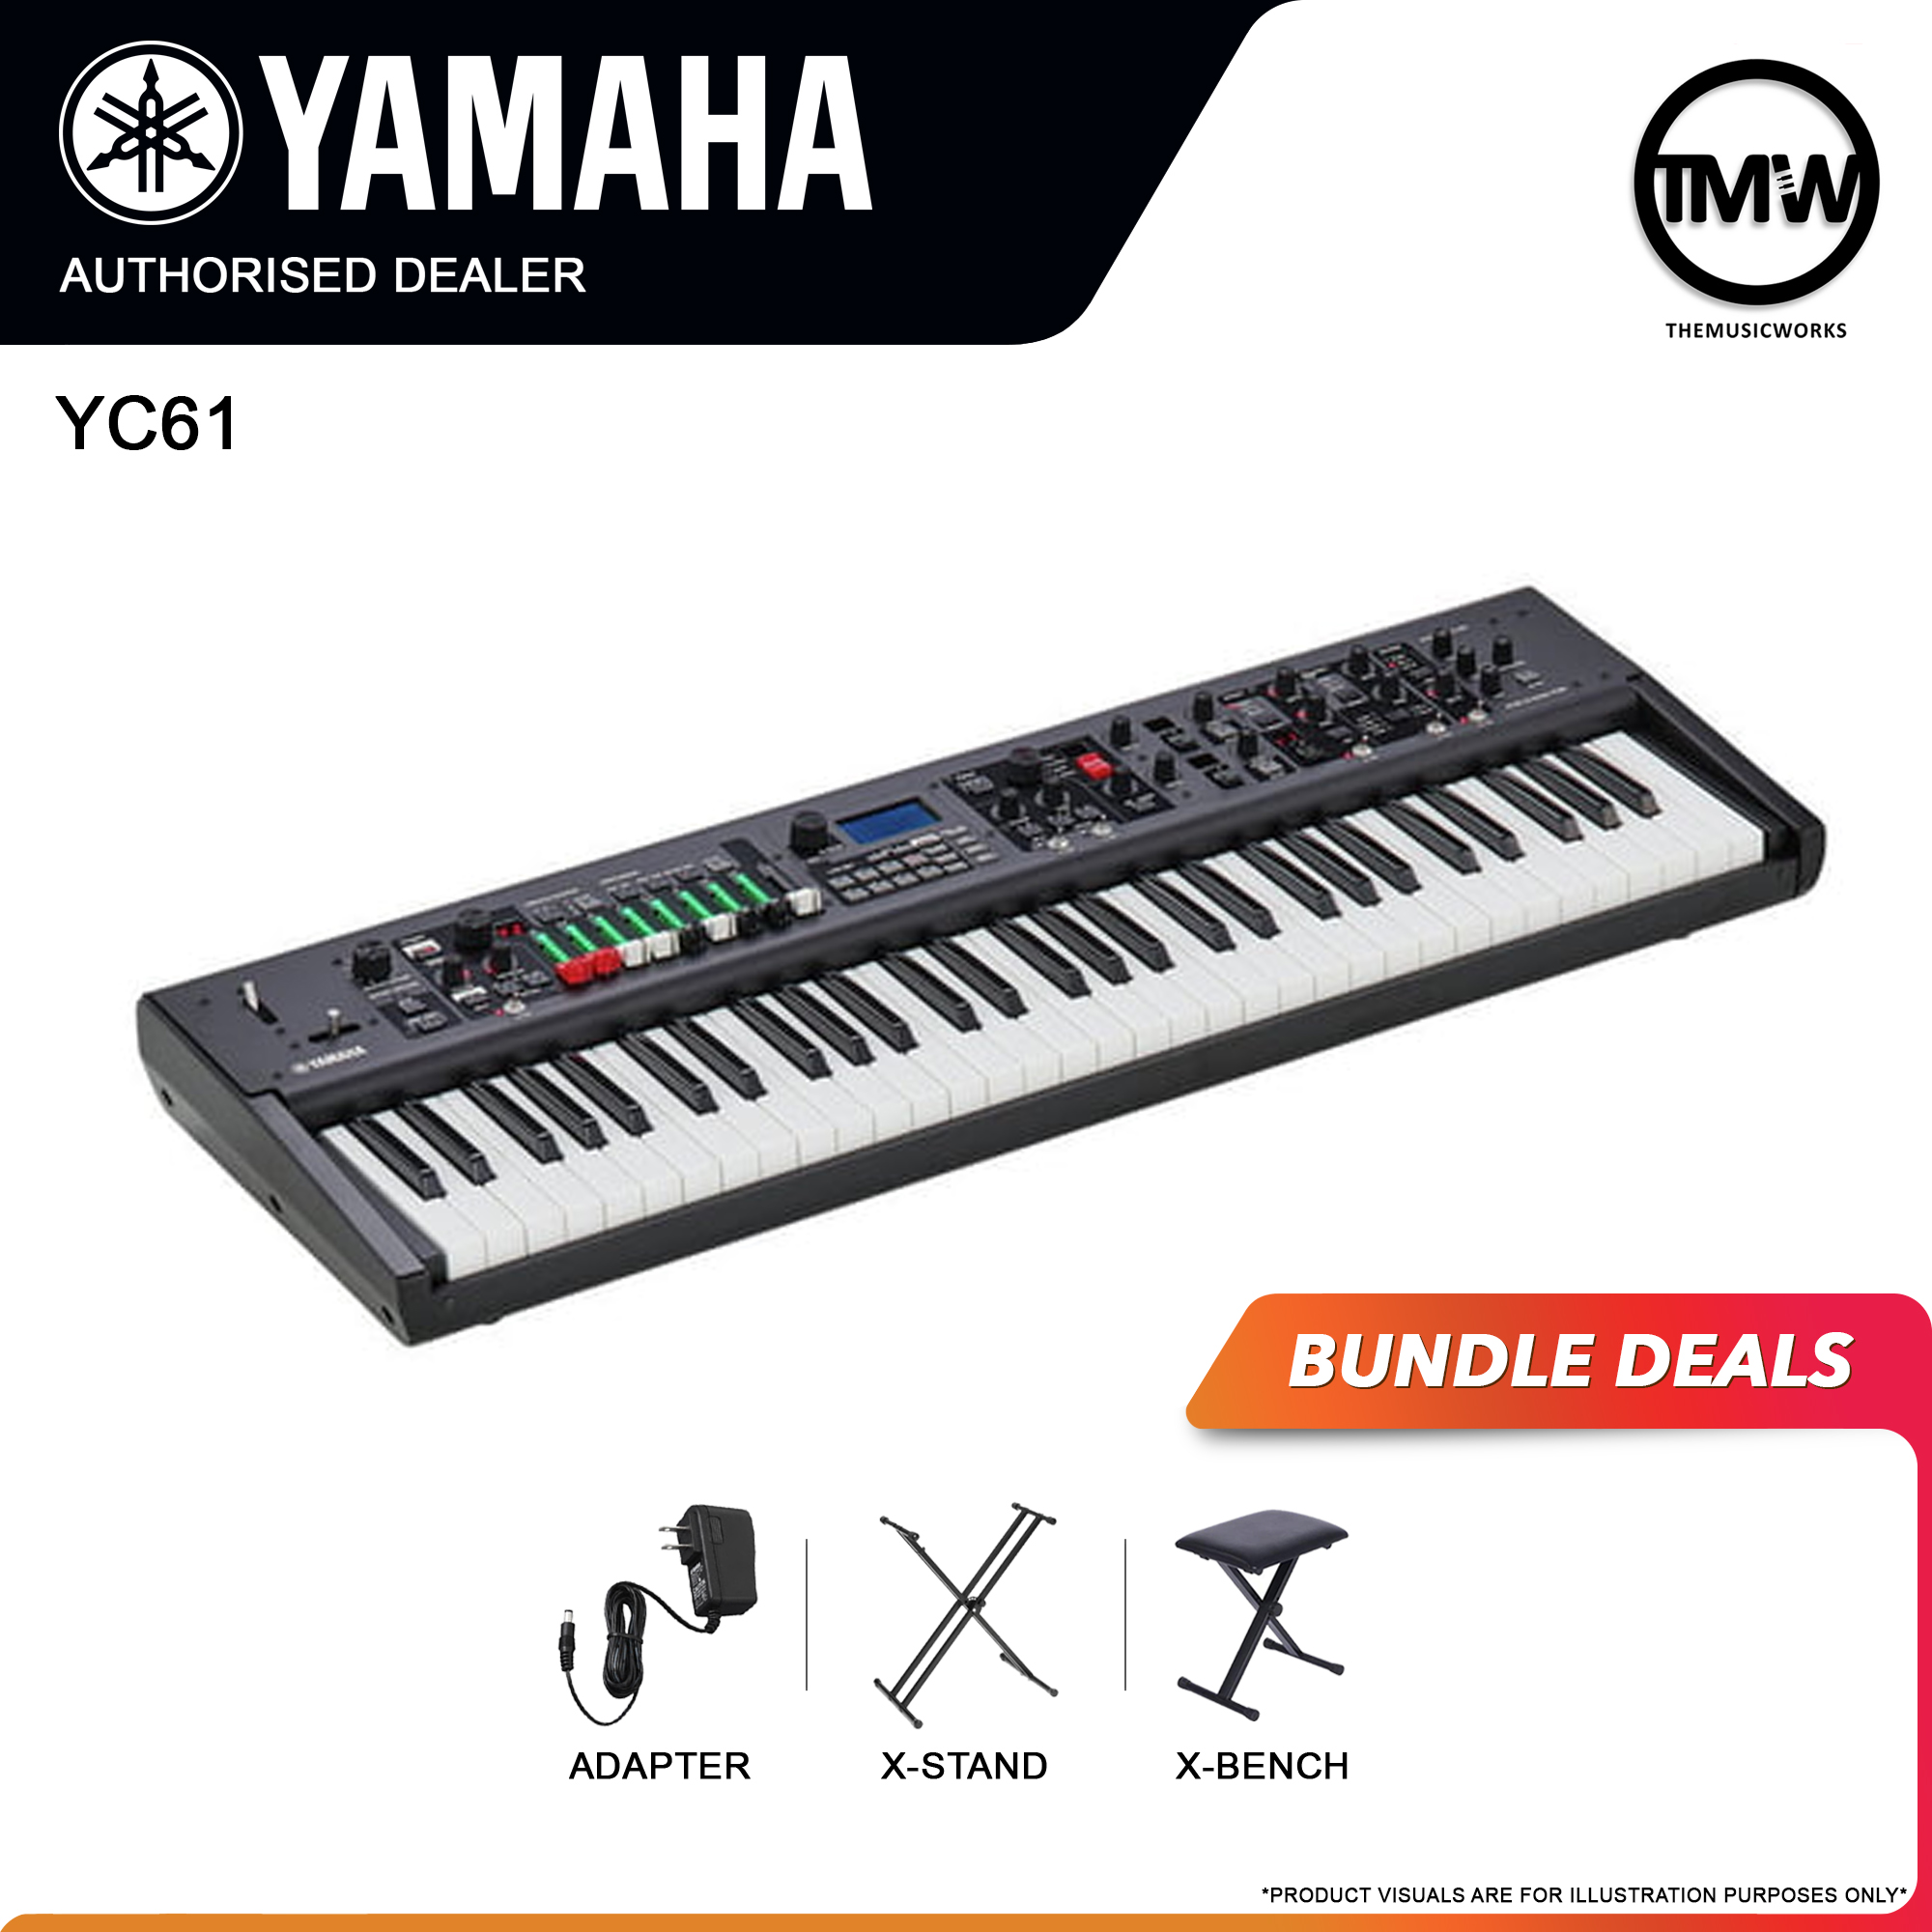 yamaha yc61 with adapter, x-stand, and x-bench